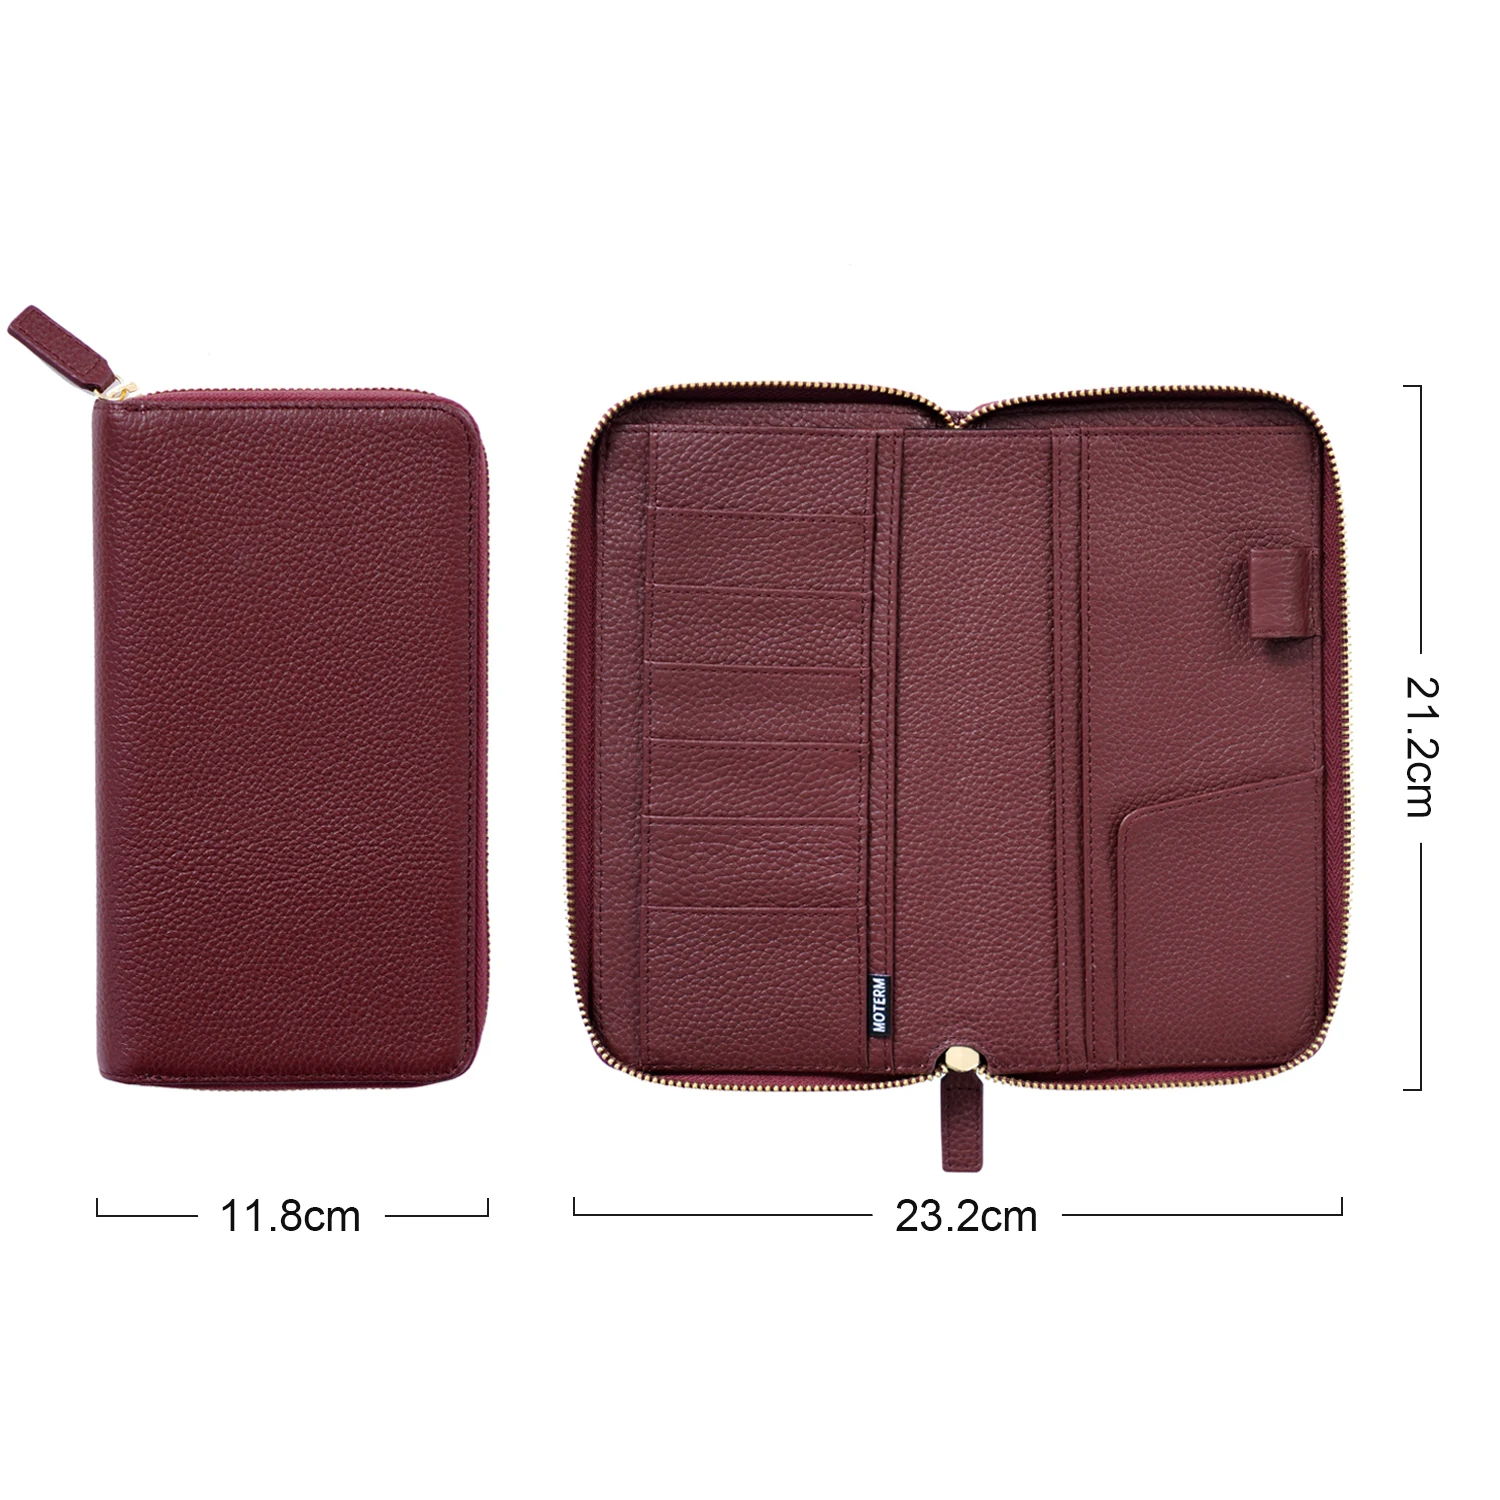 Moterm Genuine Pebbled Grain Leather A6 Zip Cover with Back Pocket Cowhide Planner  Zipper Organizer Agenda Journal Diary - AliExpress